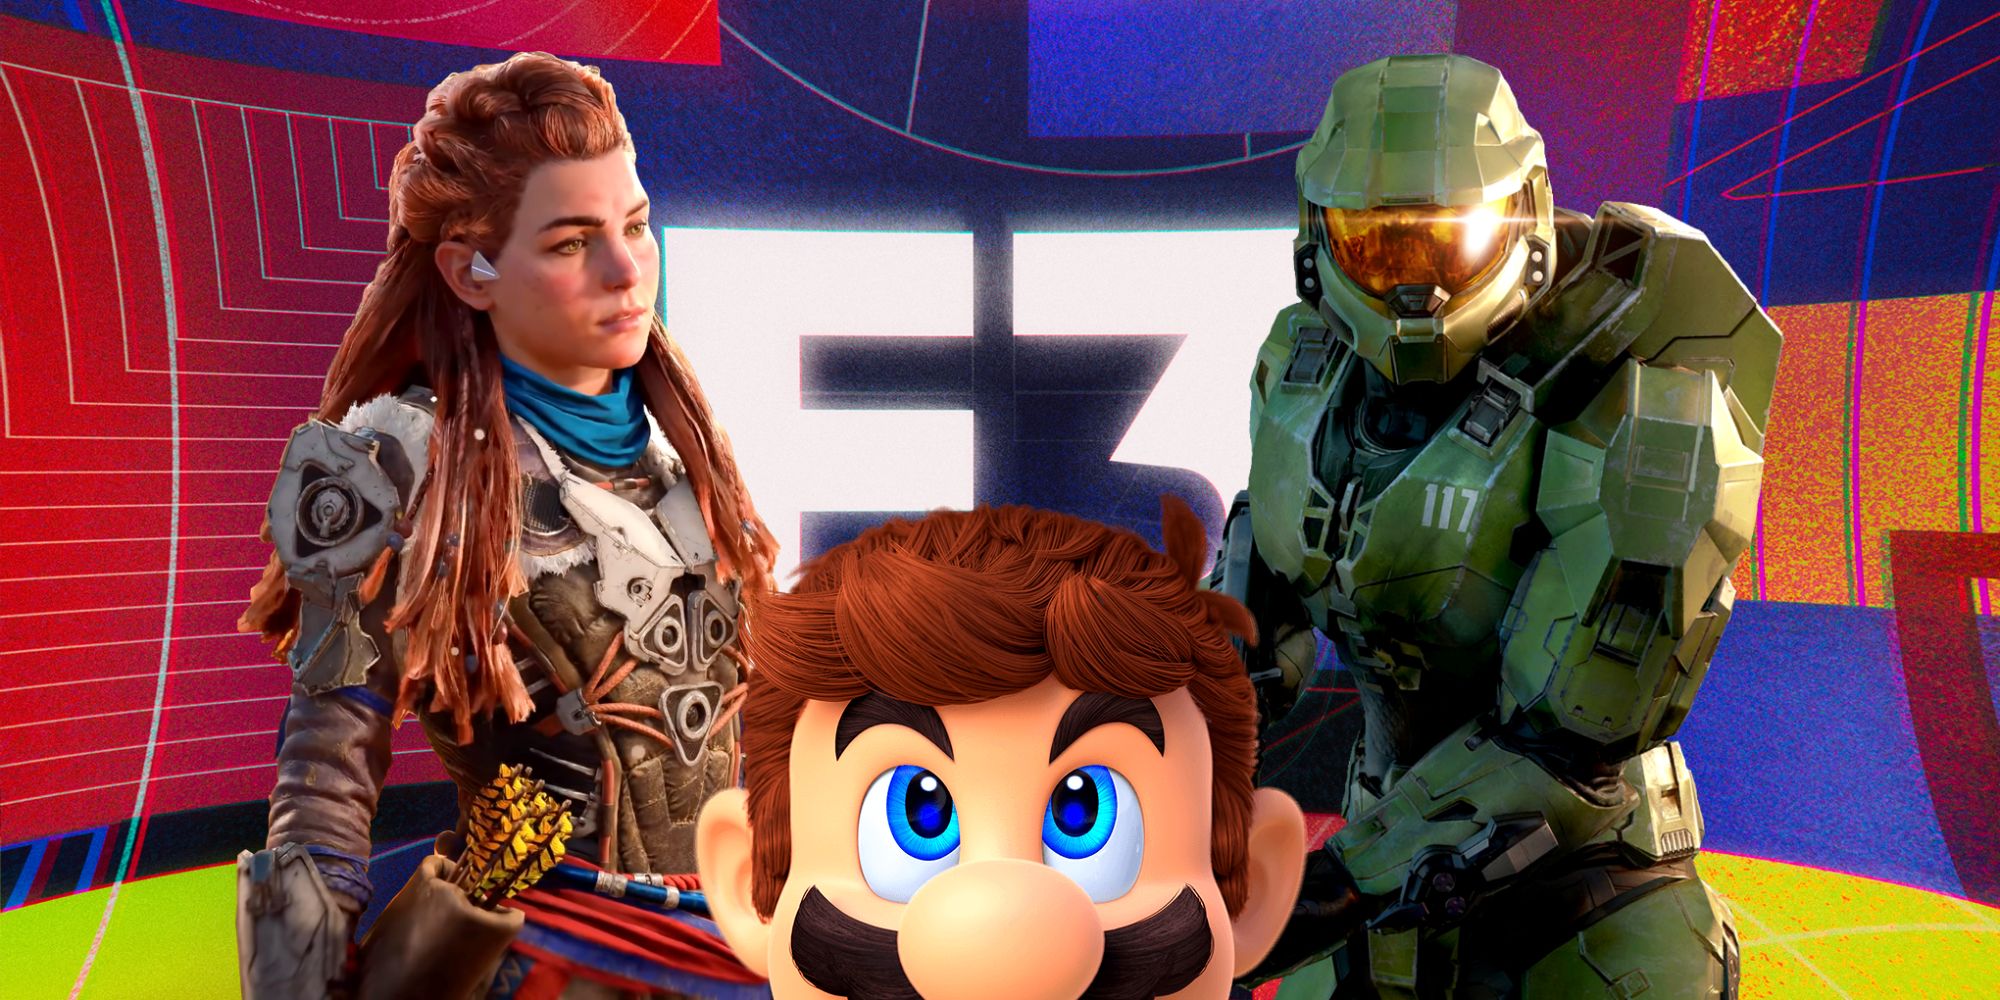 Aloy from PlayStation's Horizon franchise, Nintendo's Super Mario, and Halo's Master Chief in front of a bright white E3 logo on a multi-colored background.